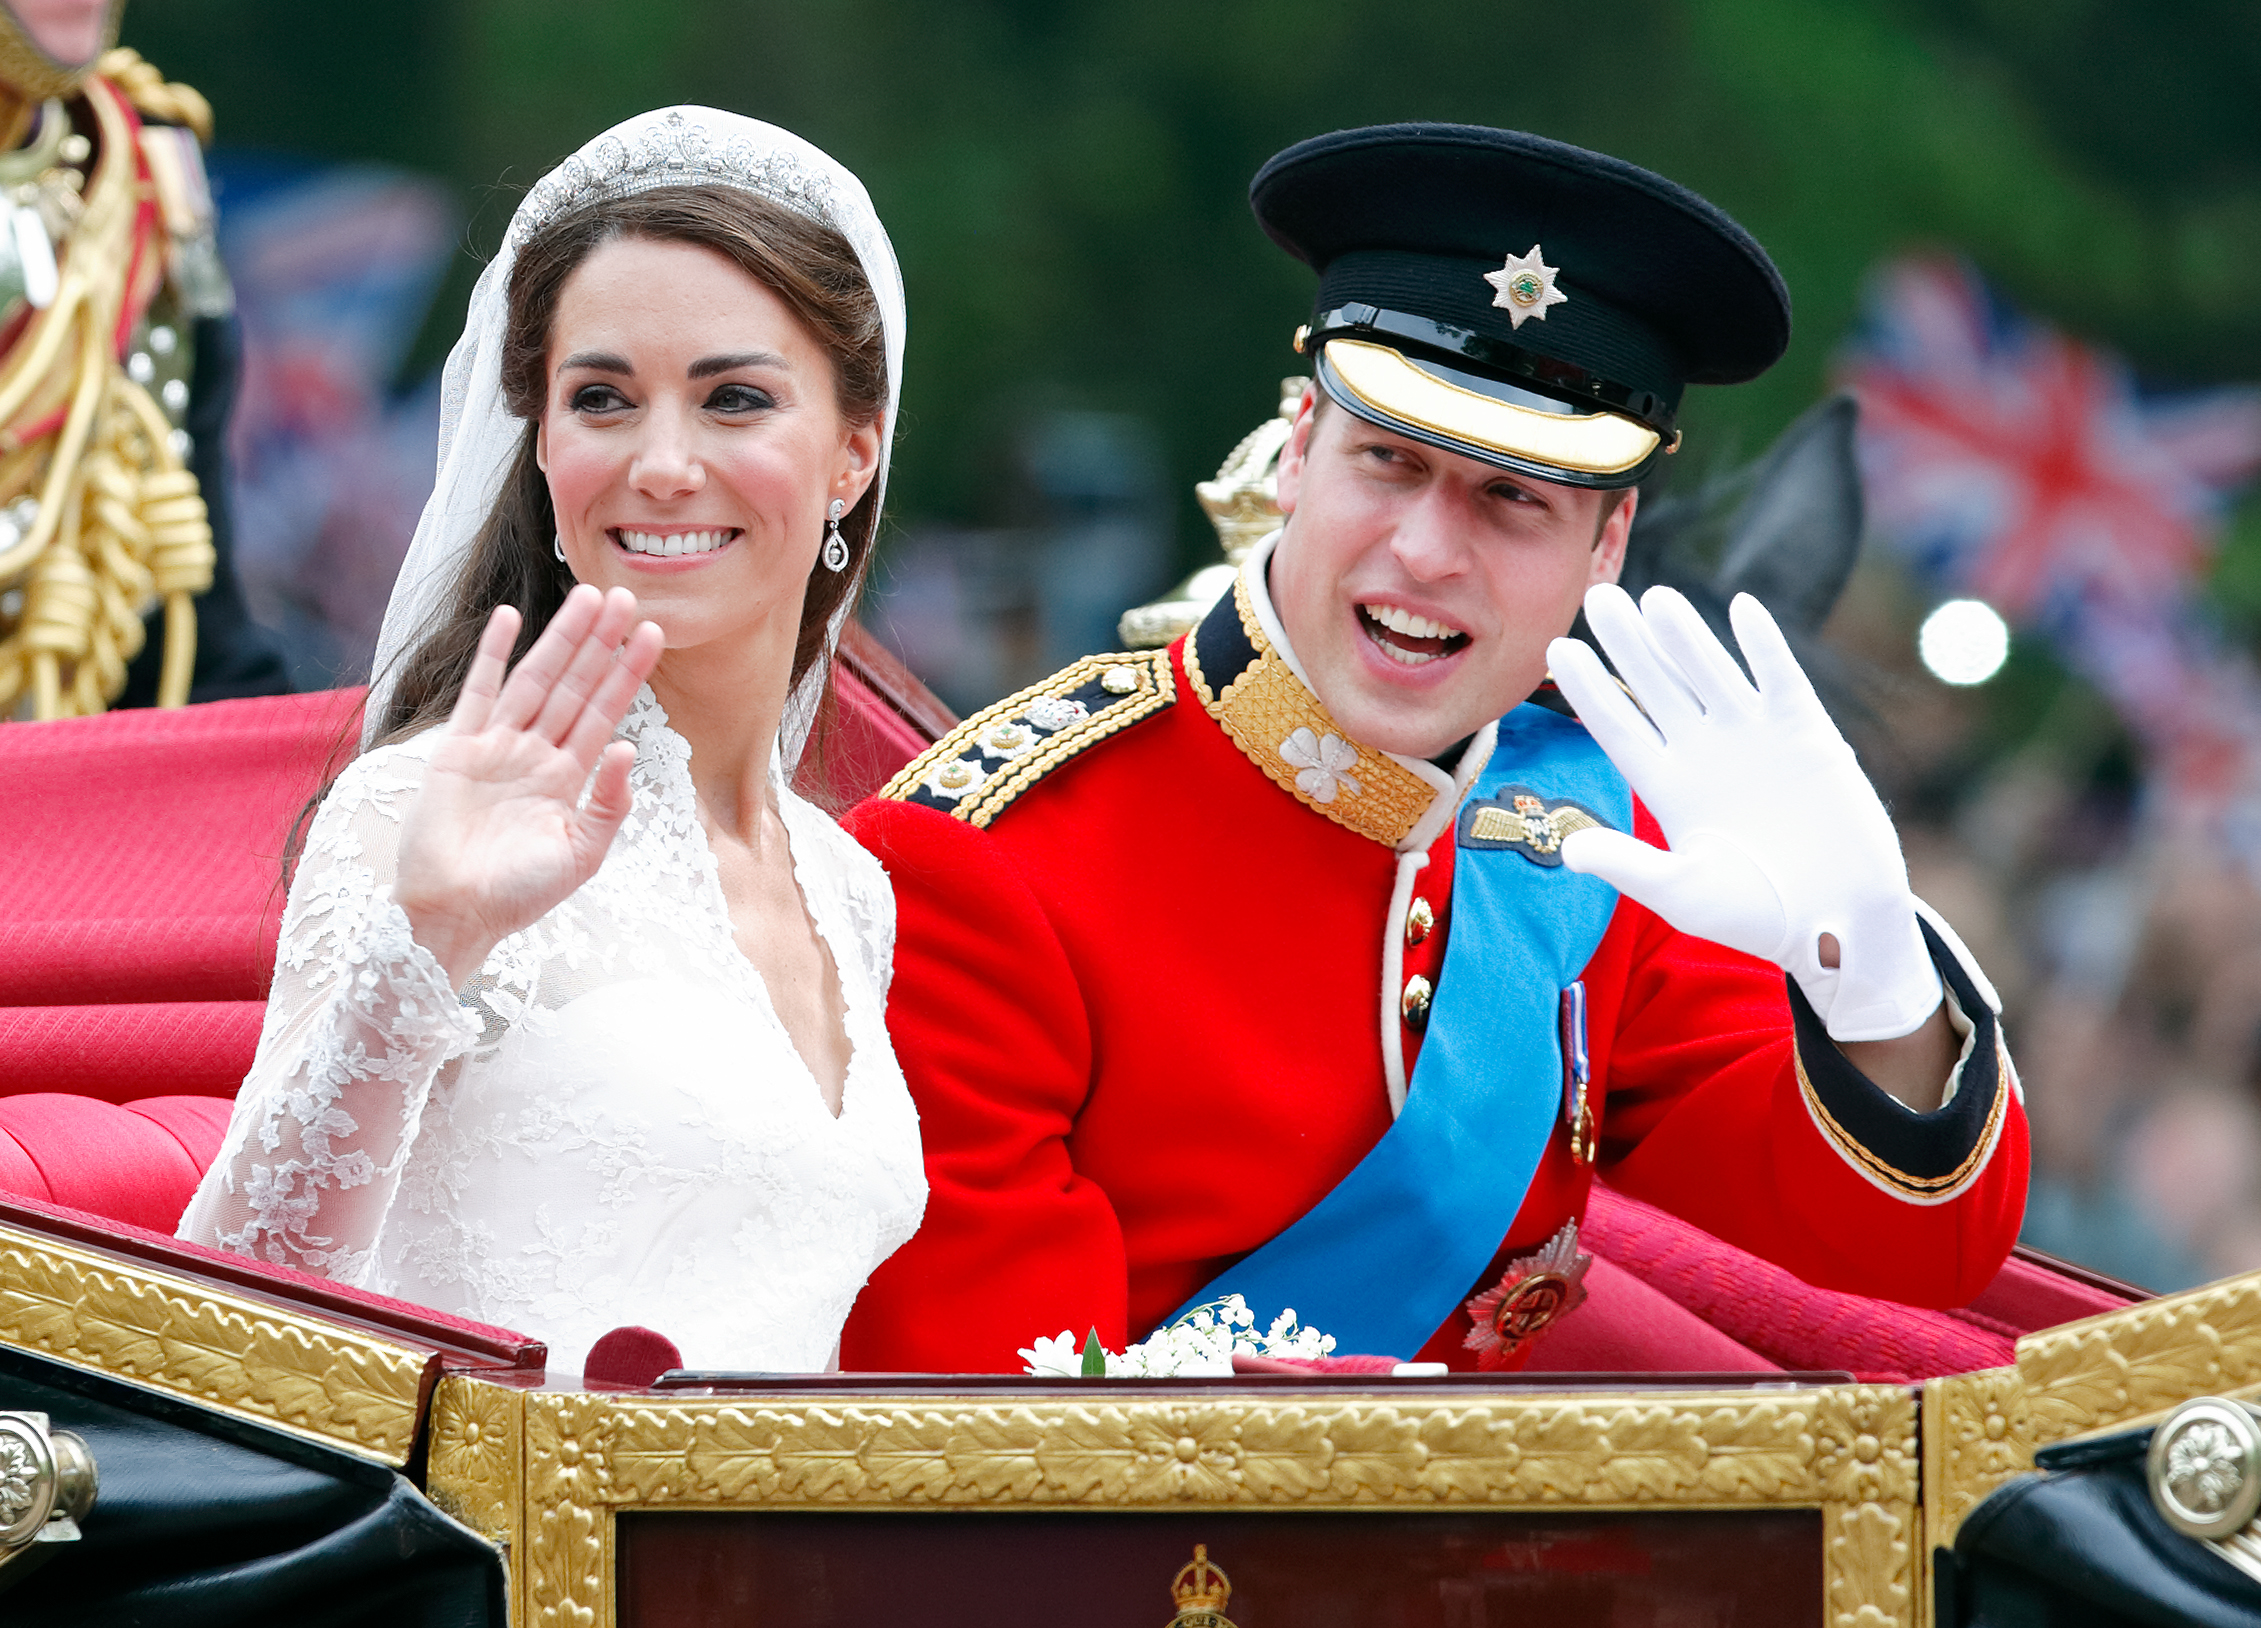 Kate Middleton and Prince William travel down The Mall, on route to Buckingham Palace following their wedding ceremony at Westminster Abbey on April 29, 2011 in London, England. | Source: Getty Images